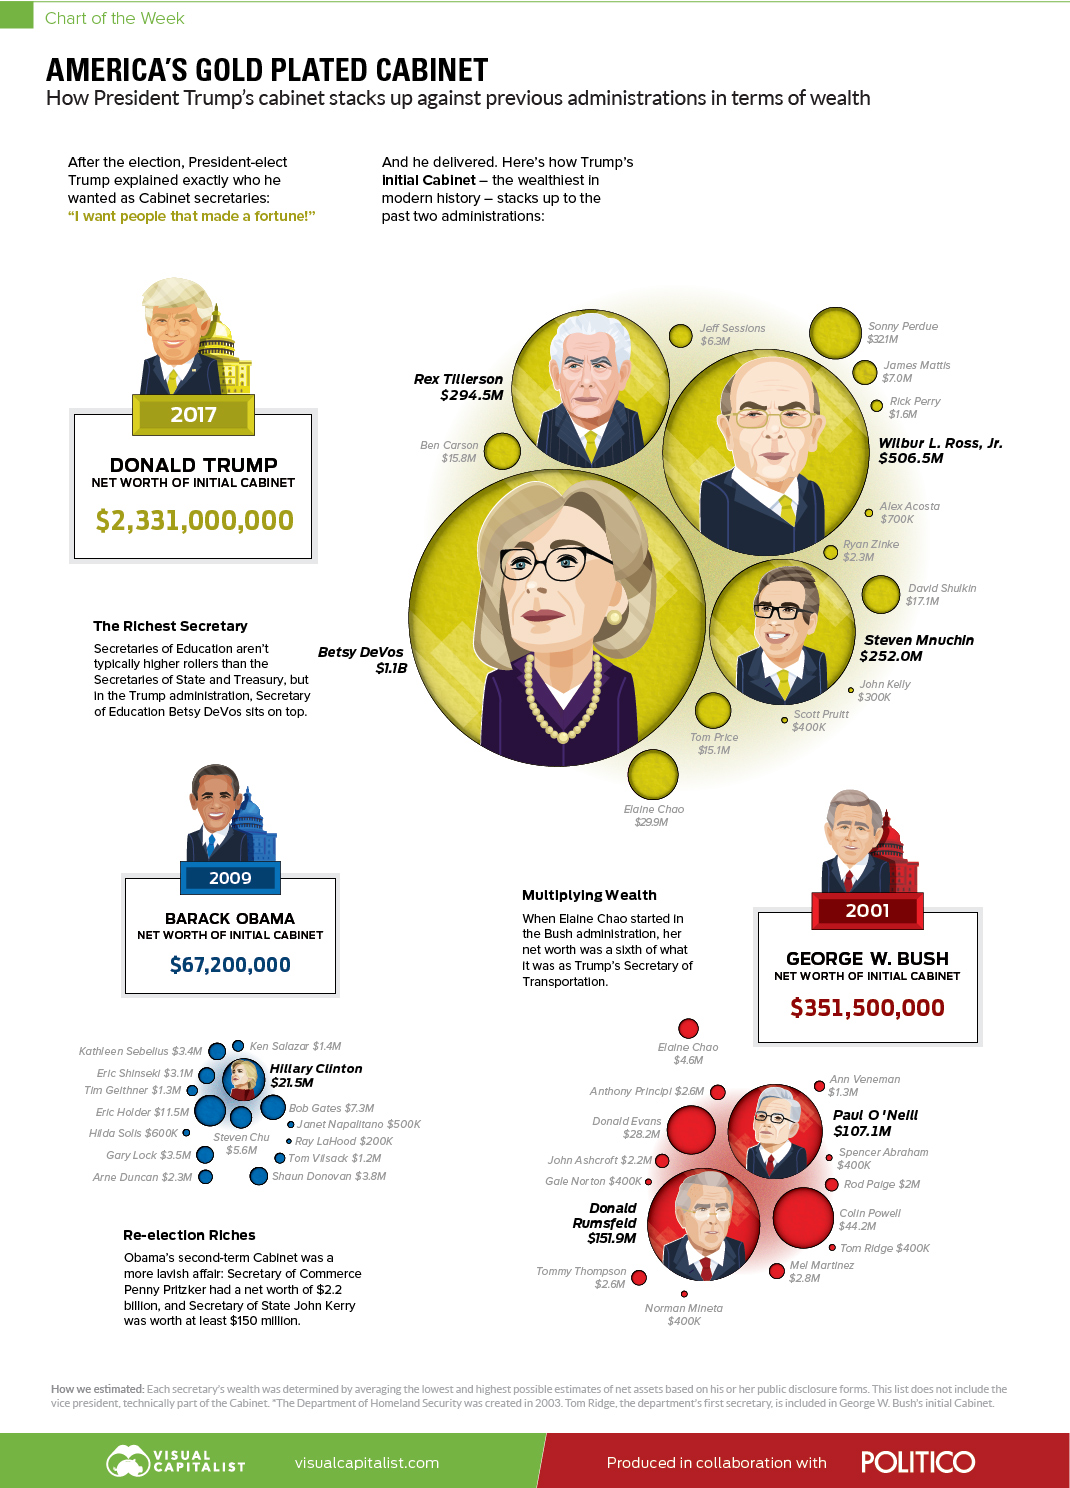 Chart: America's Gold Plated Cabinet